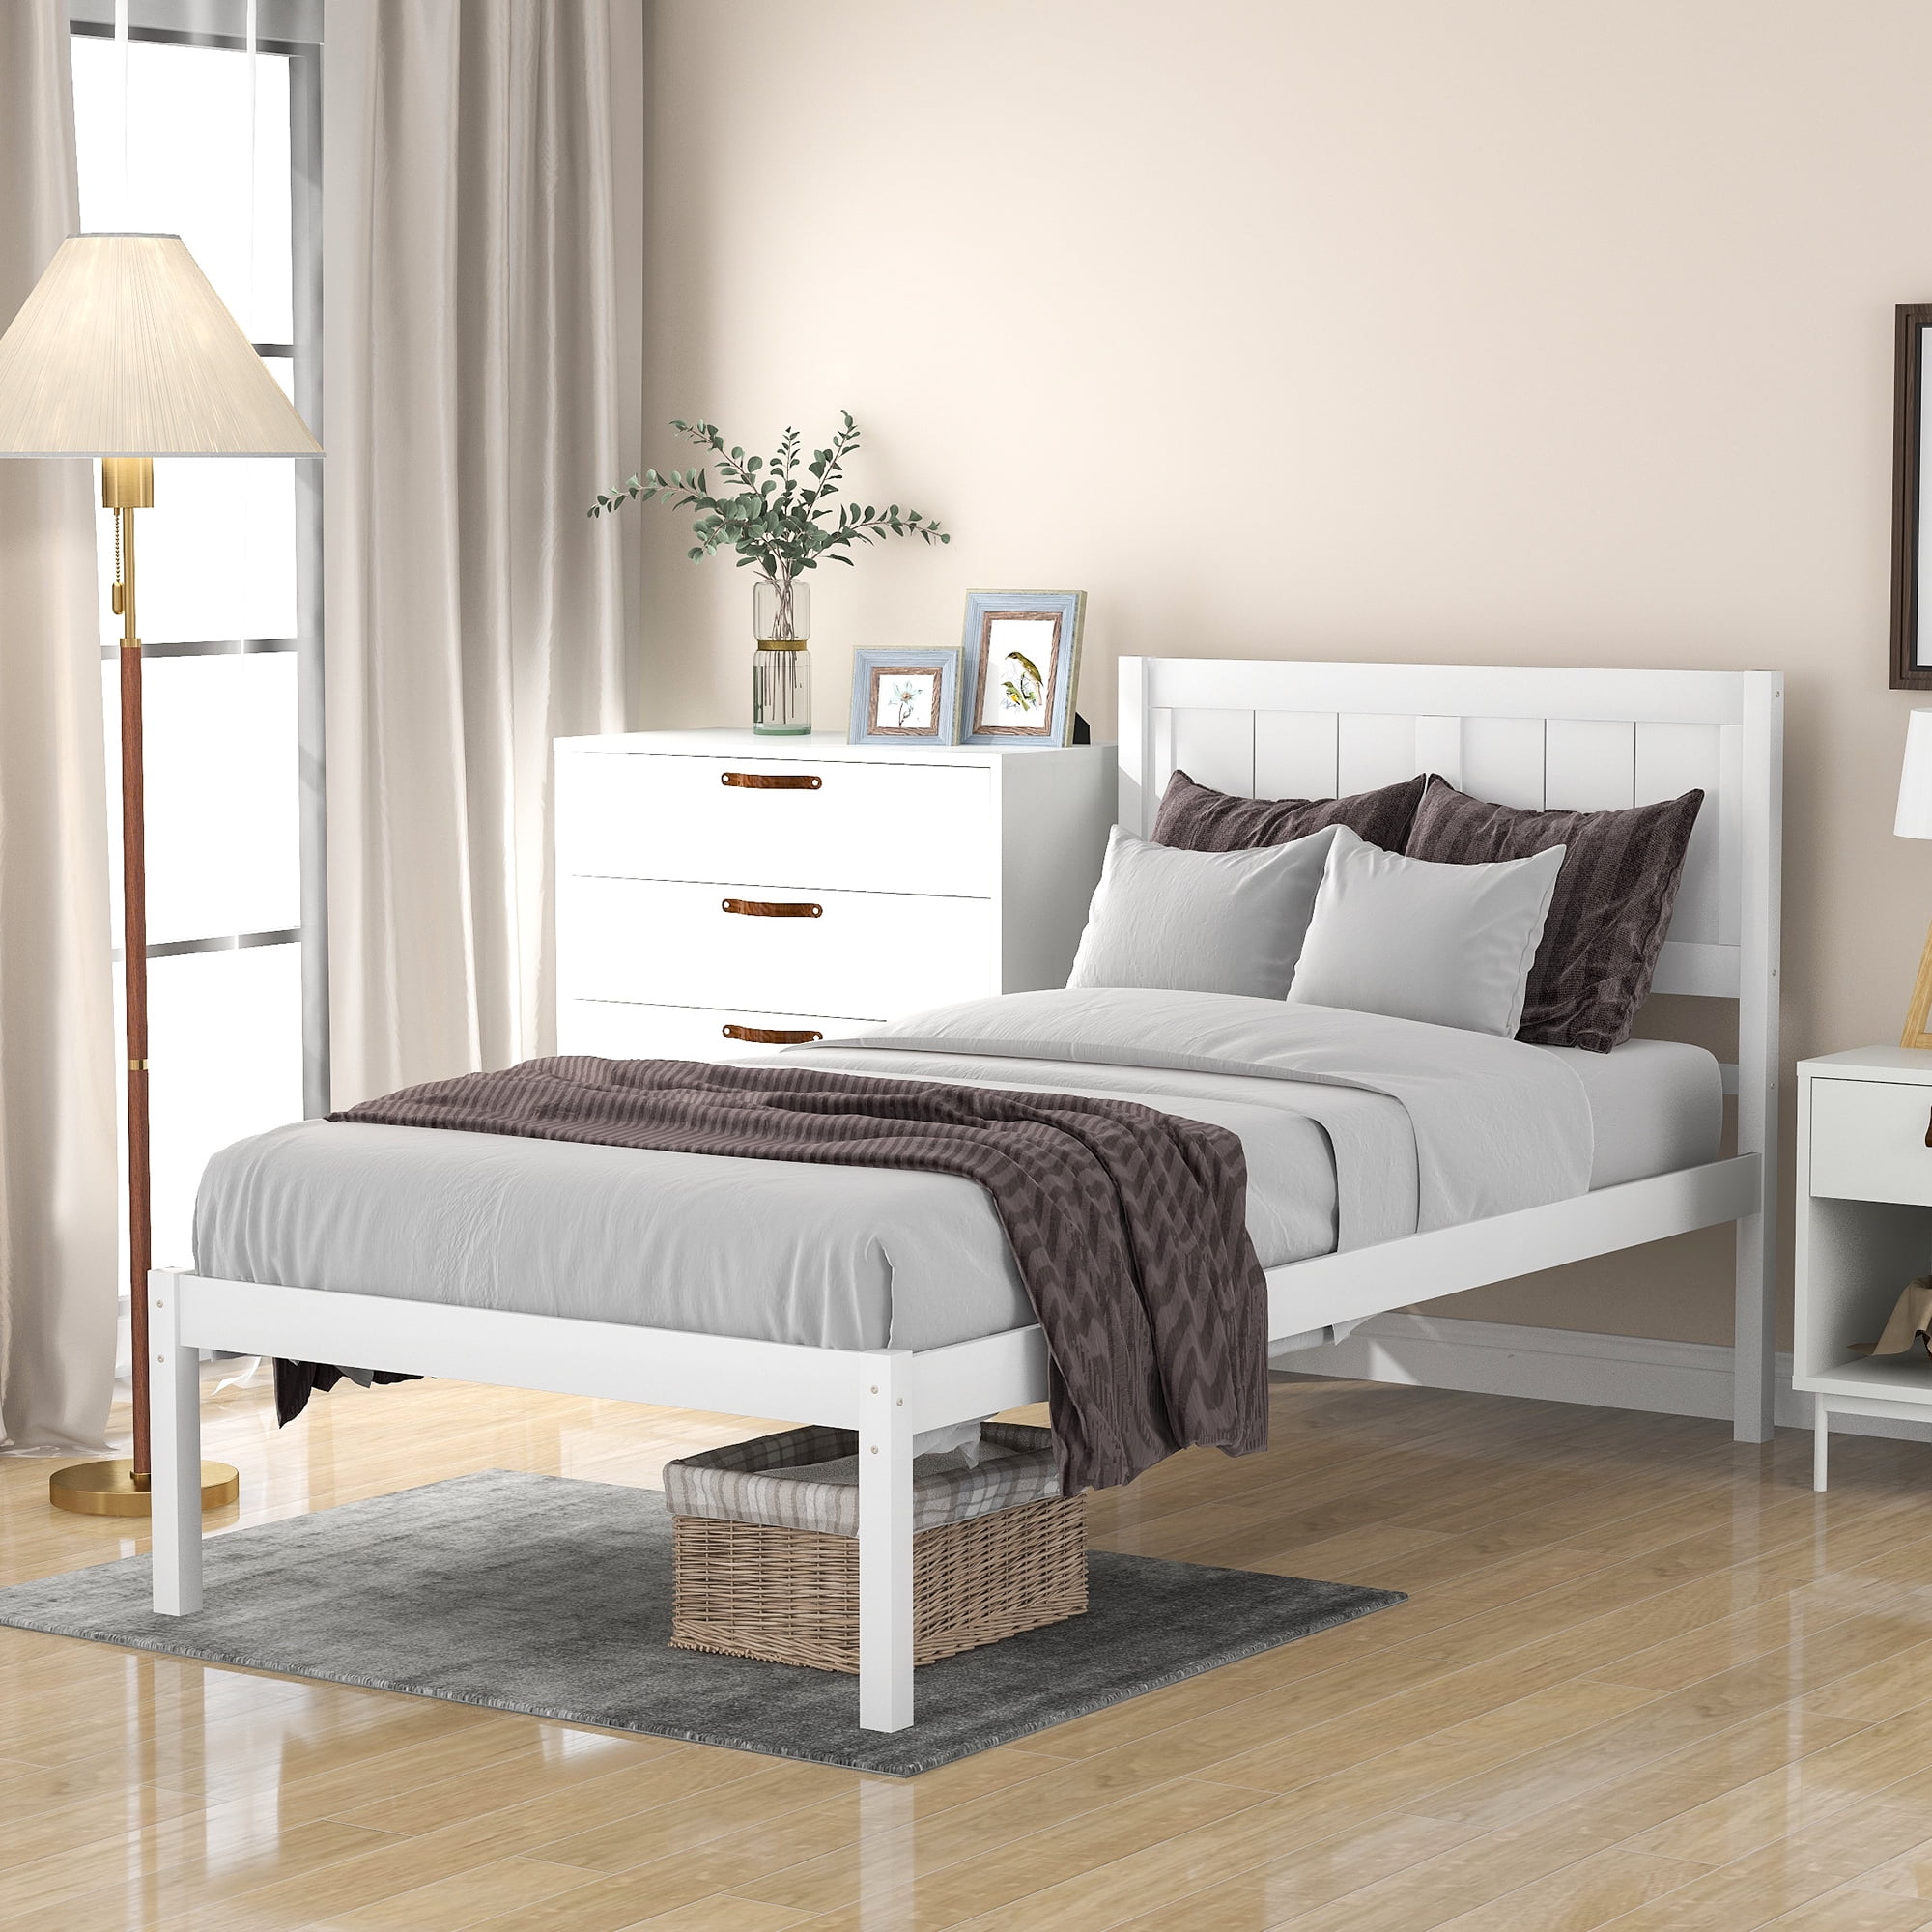 White Single Wood Bed Frame, Twin Size Bed Frame with Headboard, Modern